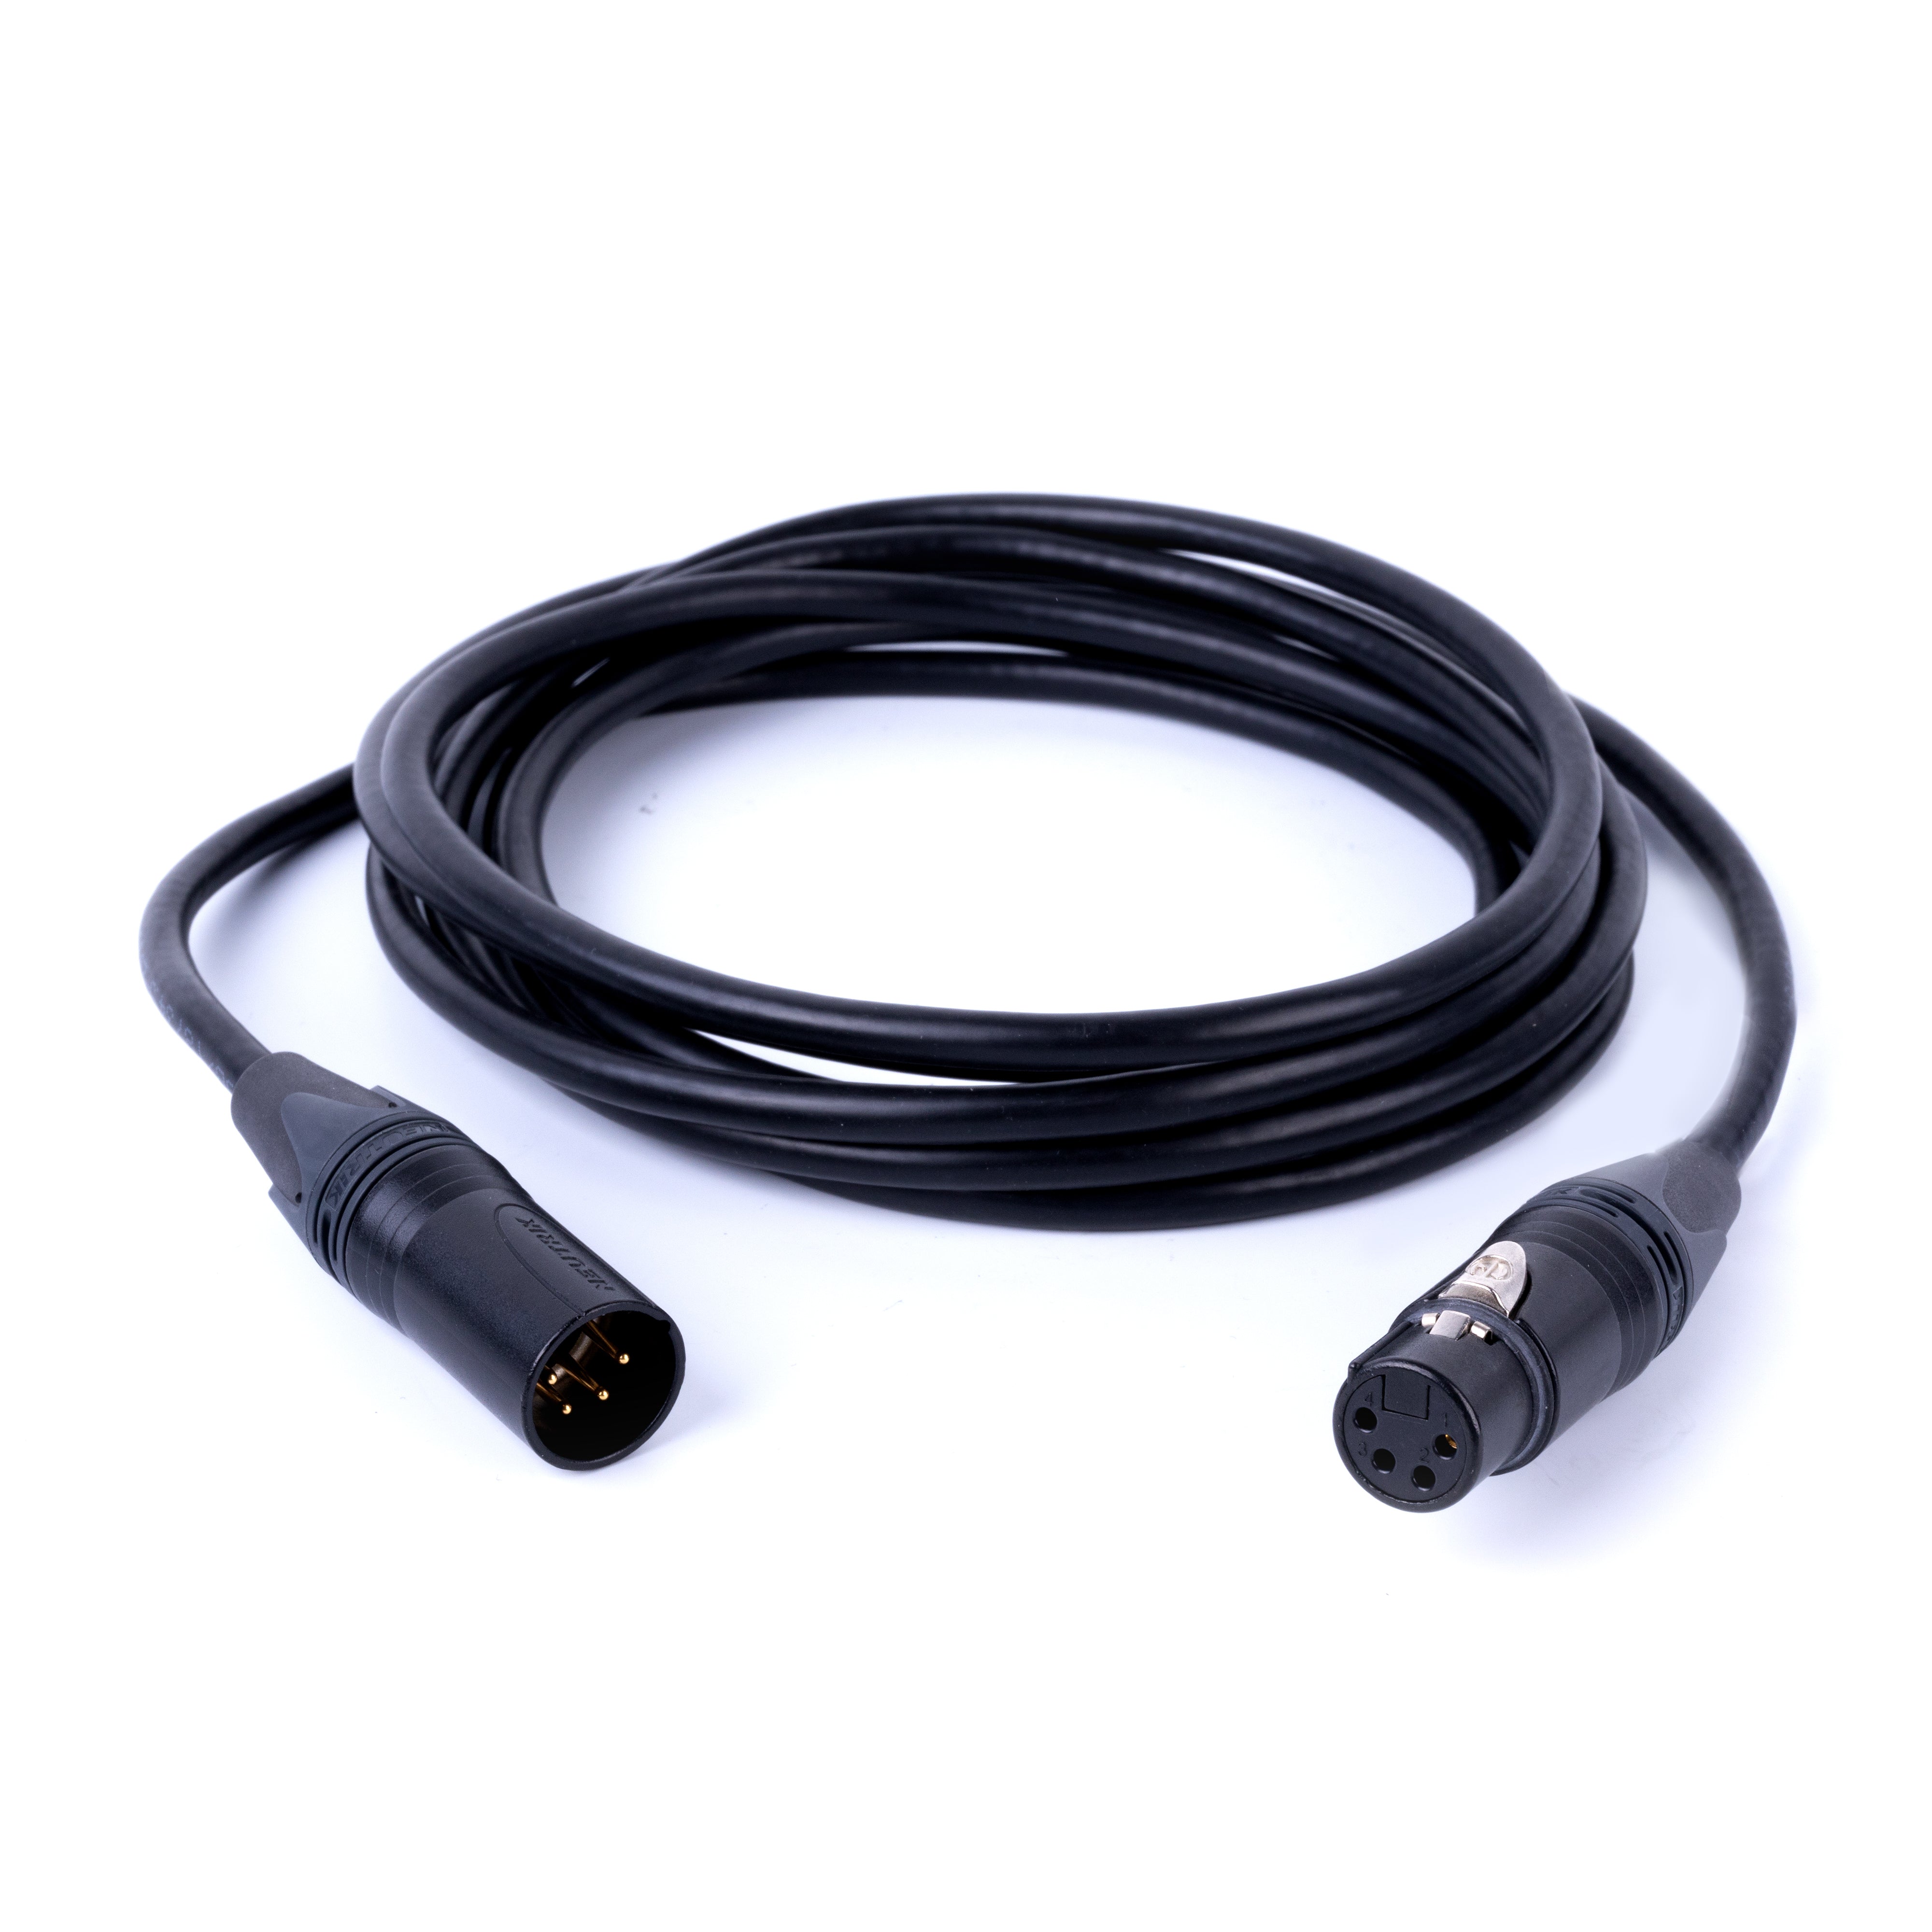 4 pin XLR Power Extension Cable (Male to Female, 120")